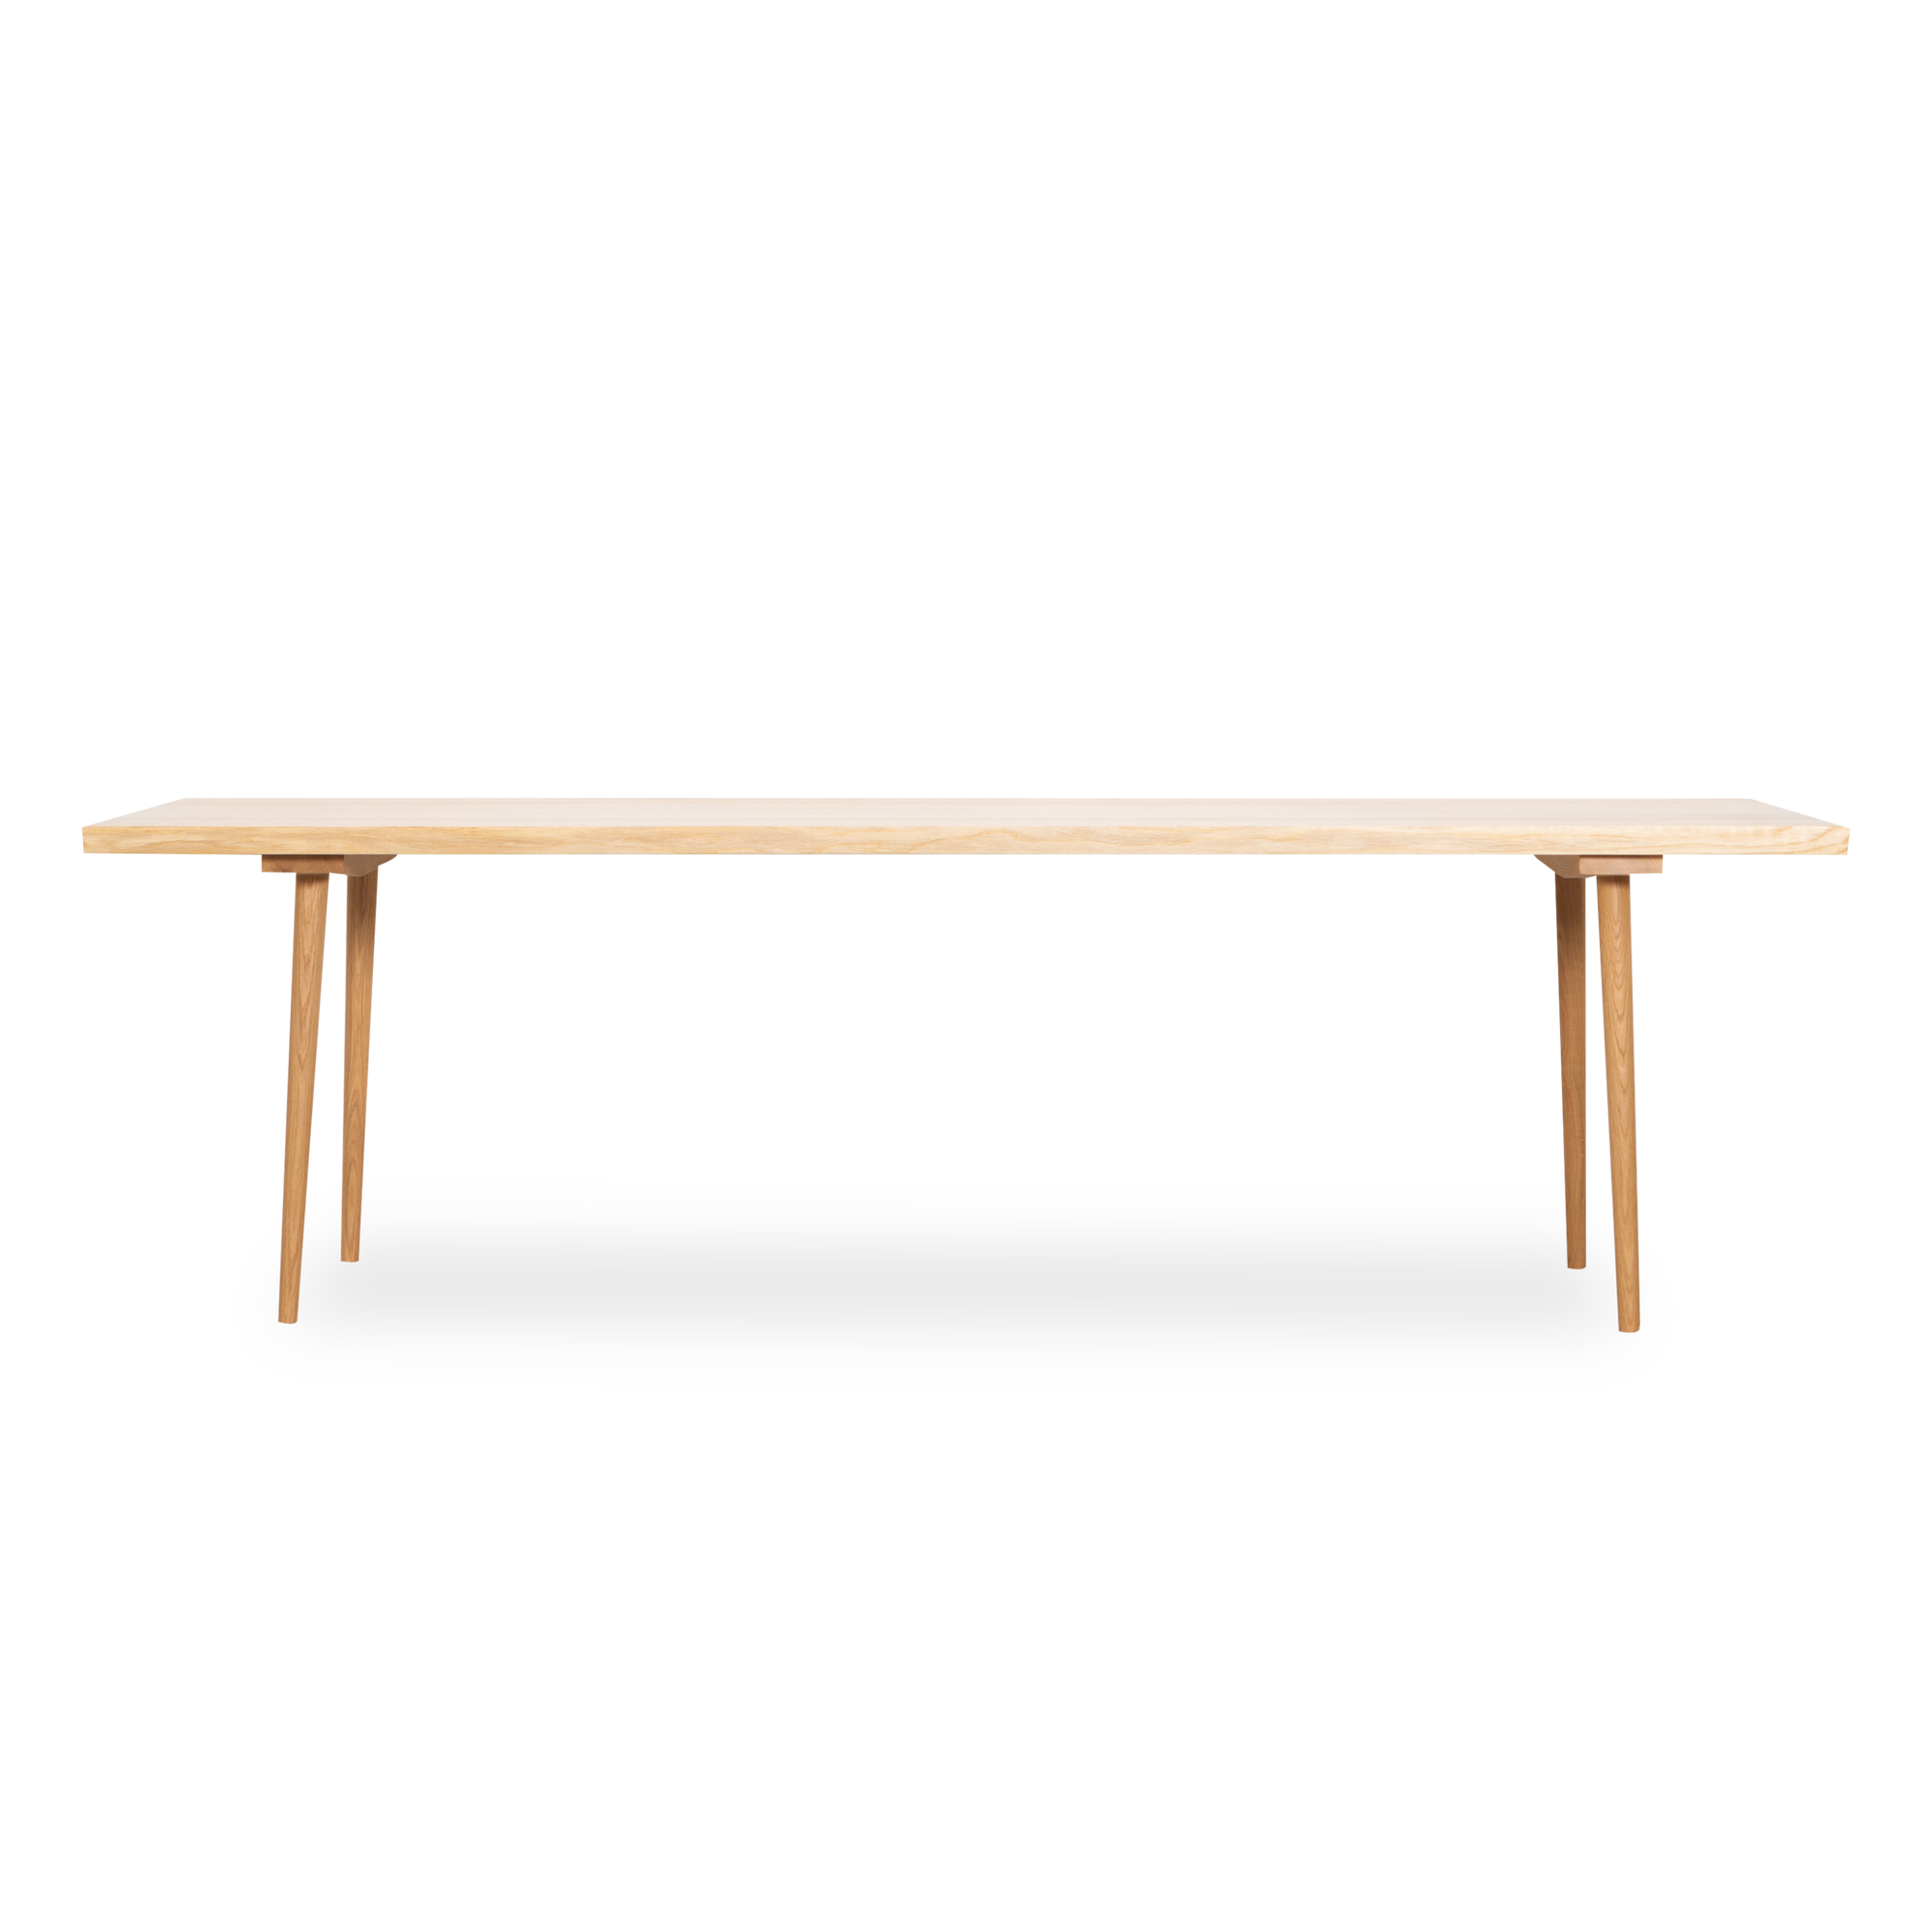 One of the first designs from Københavns Møbelsnedkeri, the KBH Deluxe Dining Table displays an organic simplicity.